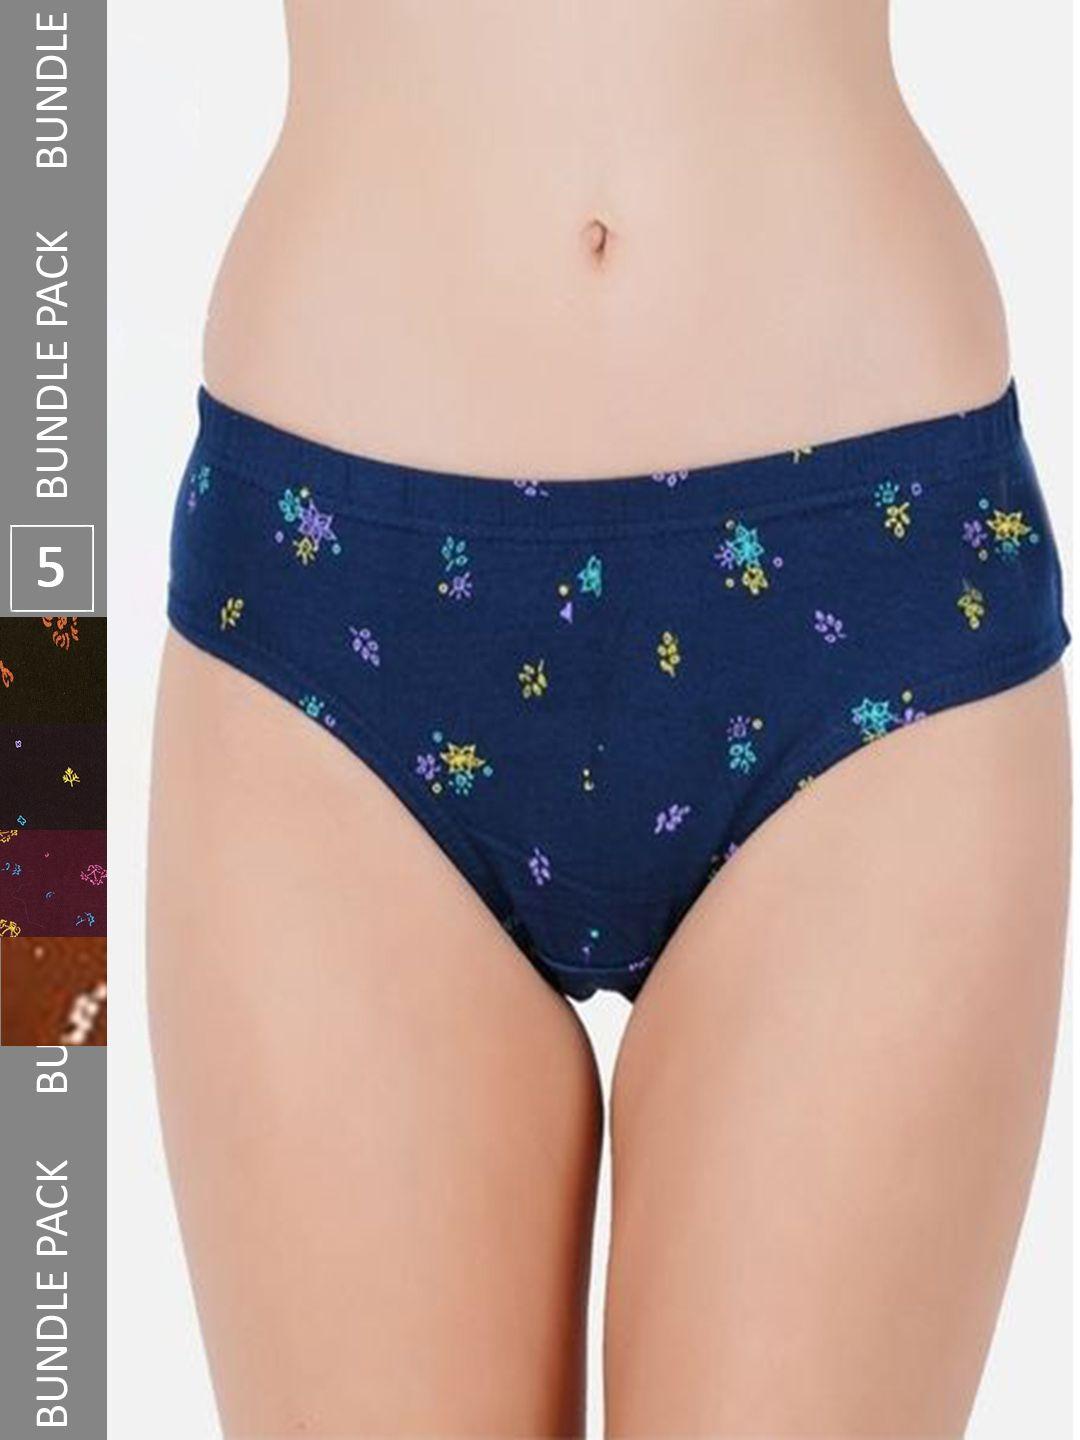 pride apparel women pack of 5 assorted floral printed cotton anti microbial hipster briefs